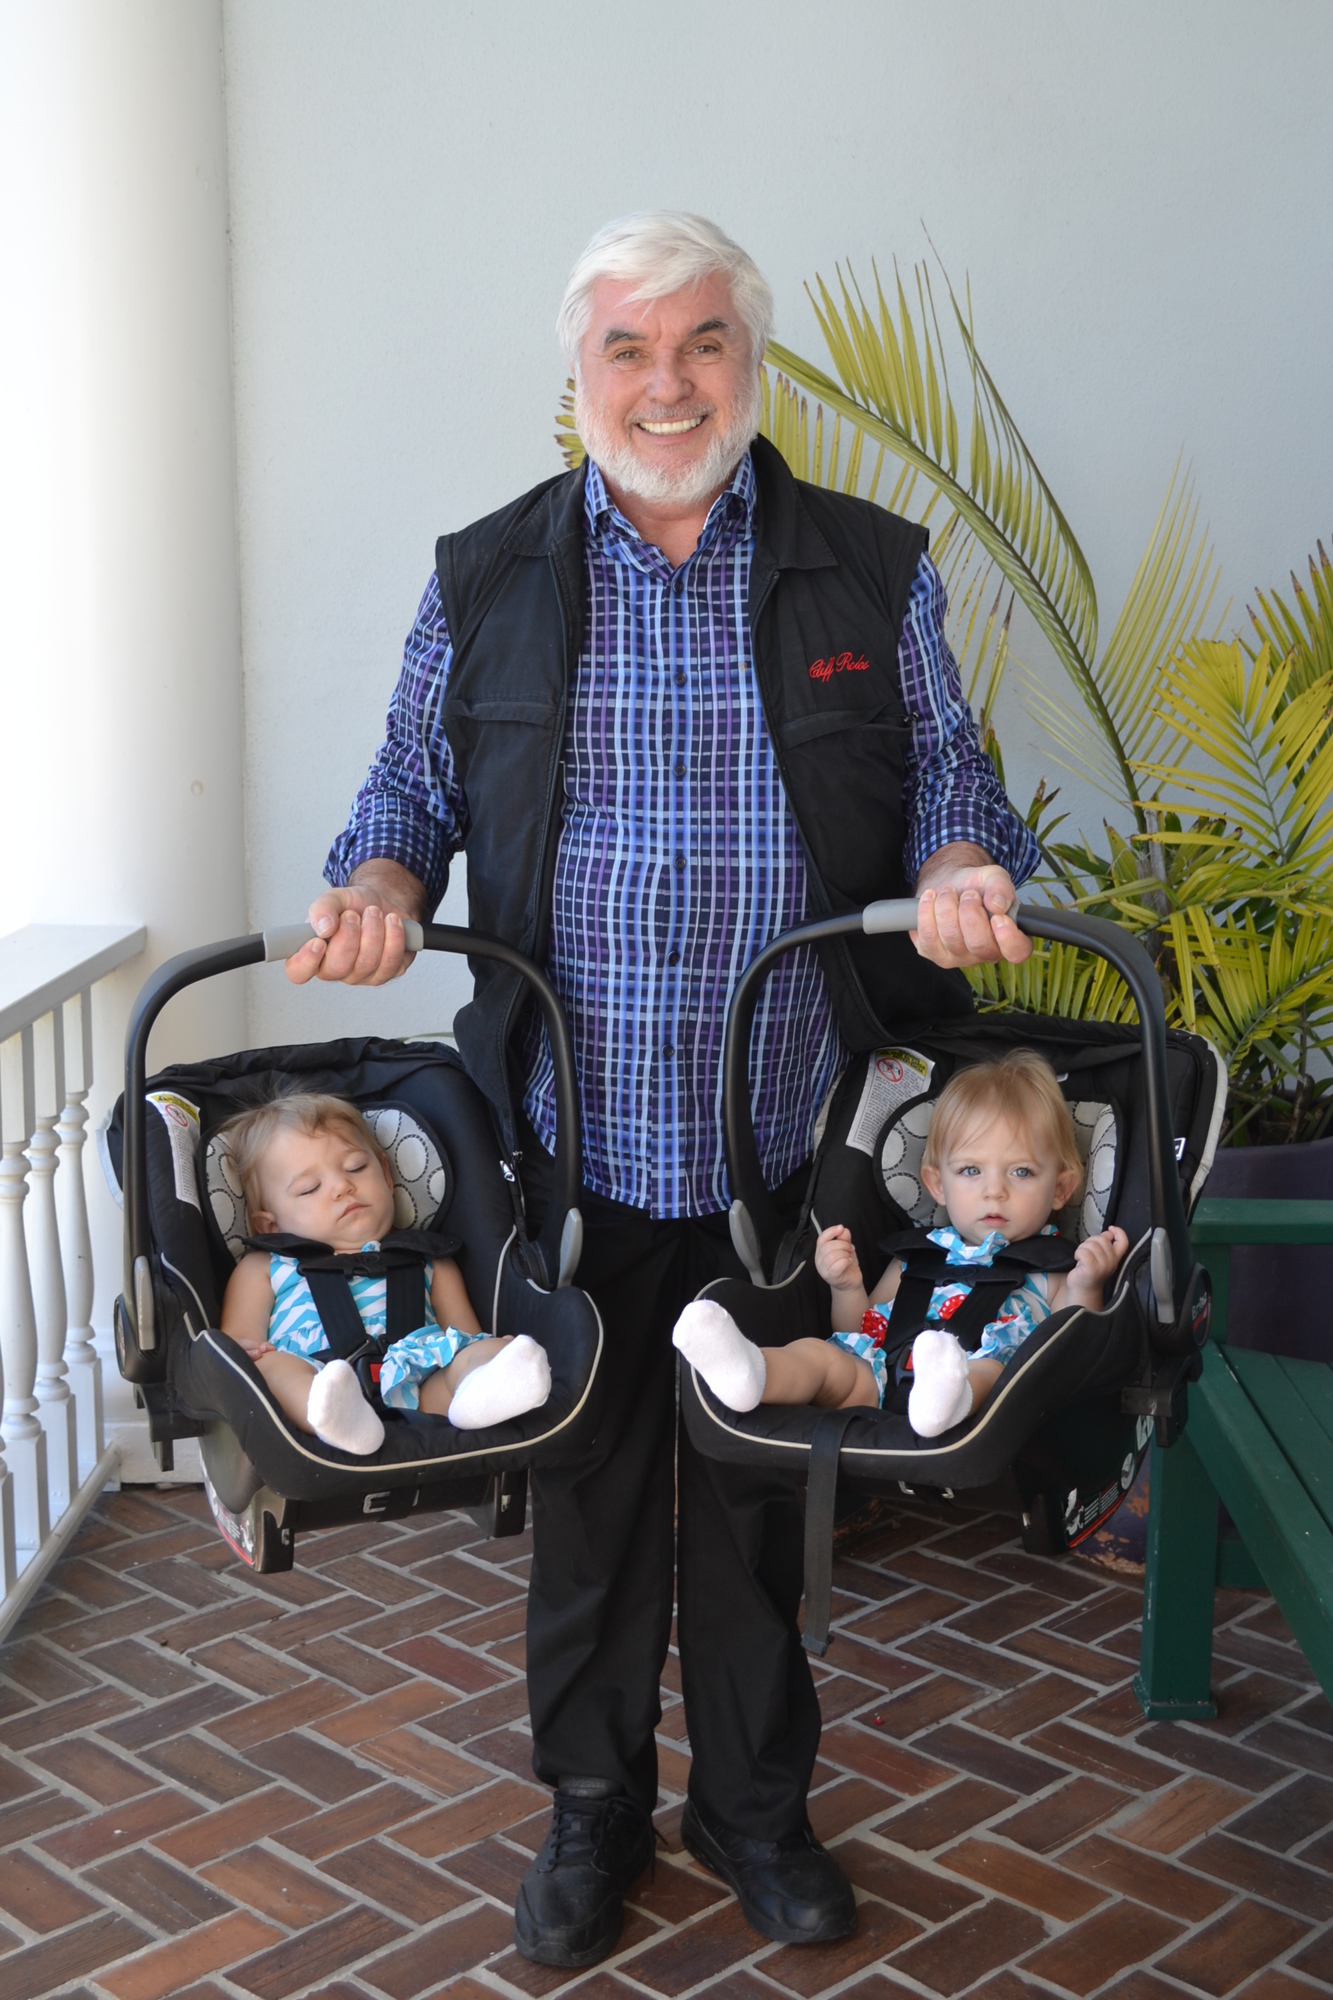 Birthday boy Cliff Roles with granddaughters Emery (sleeping) and Aslin Bikfalvy. Photo courtesy of Cliff Roles